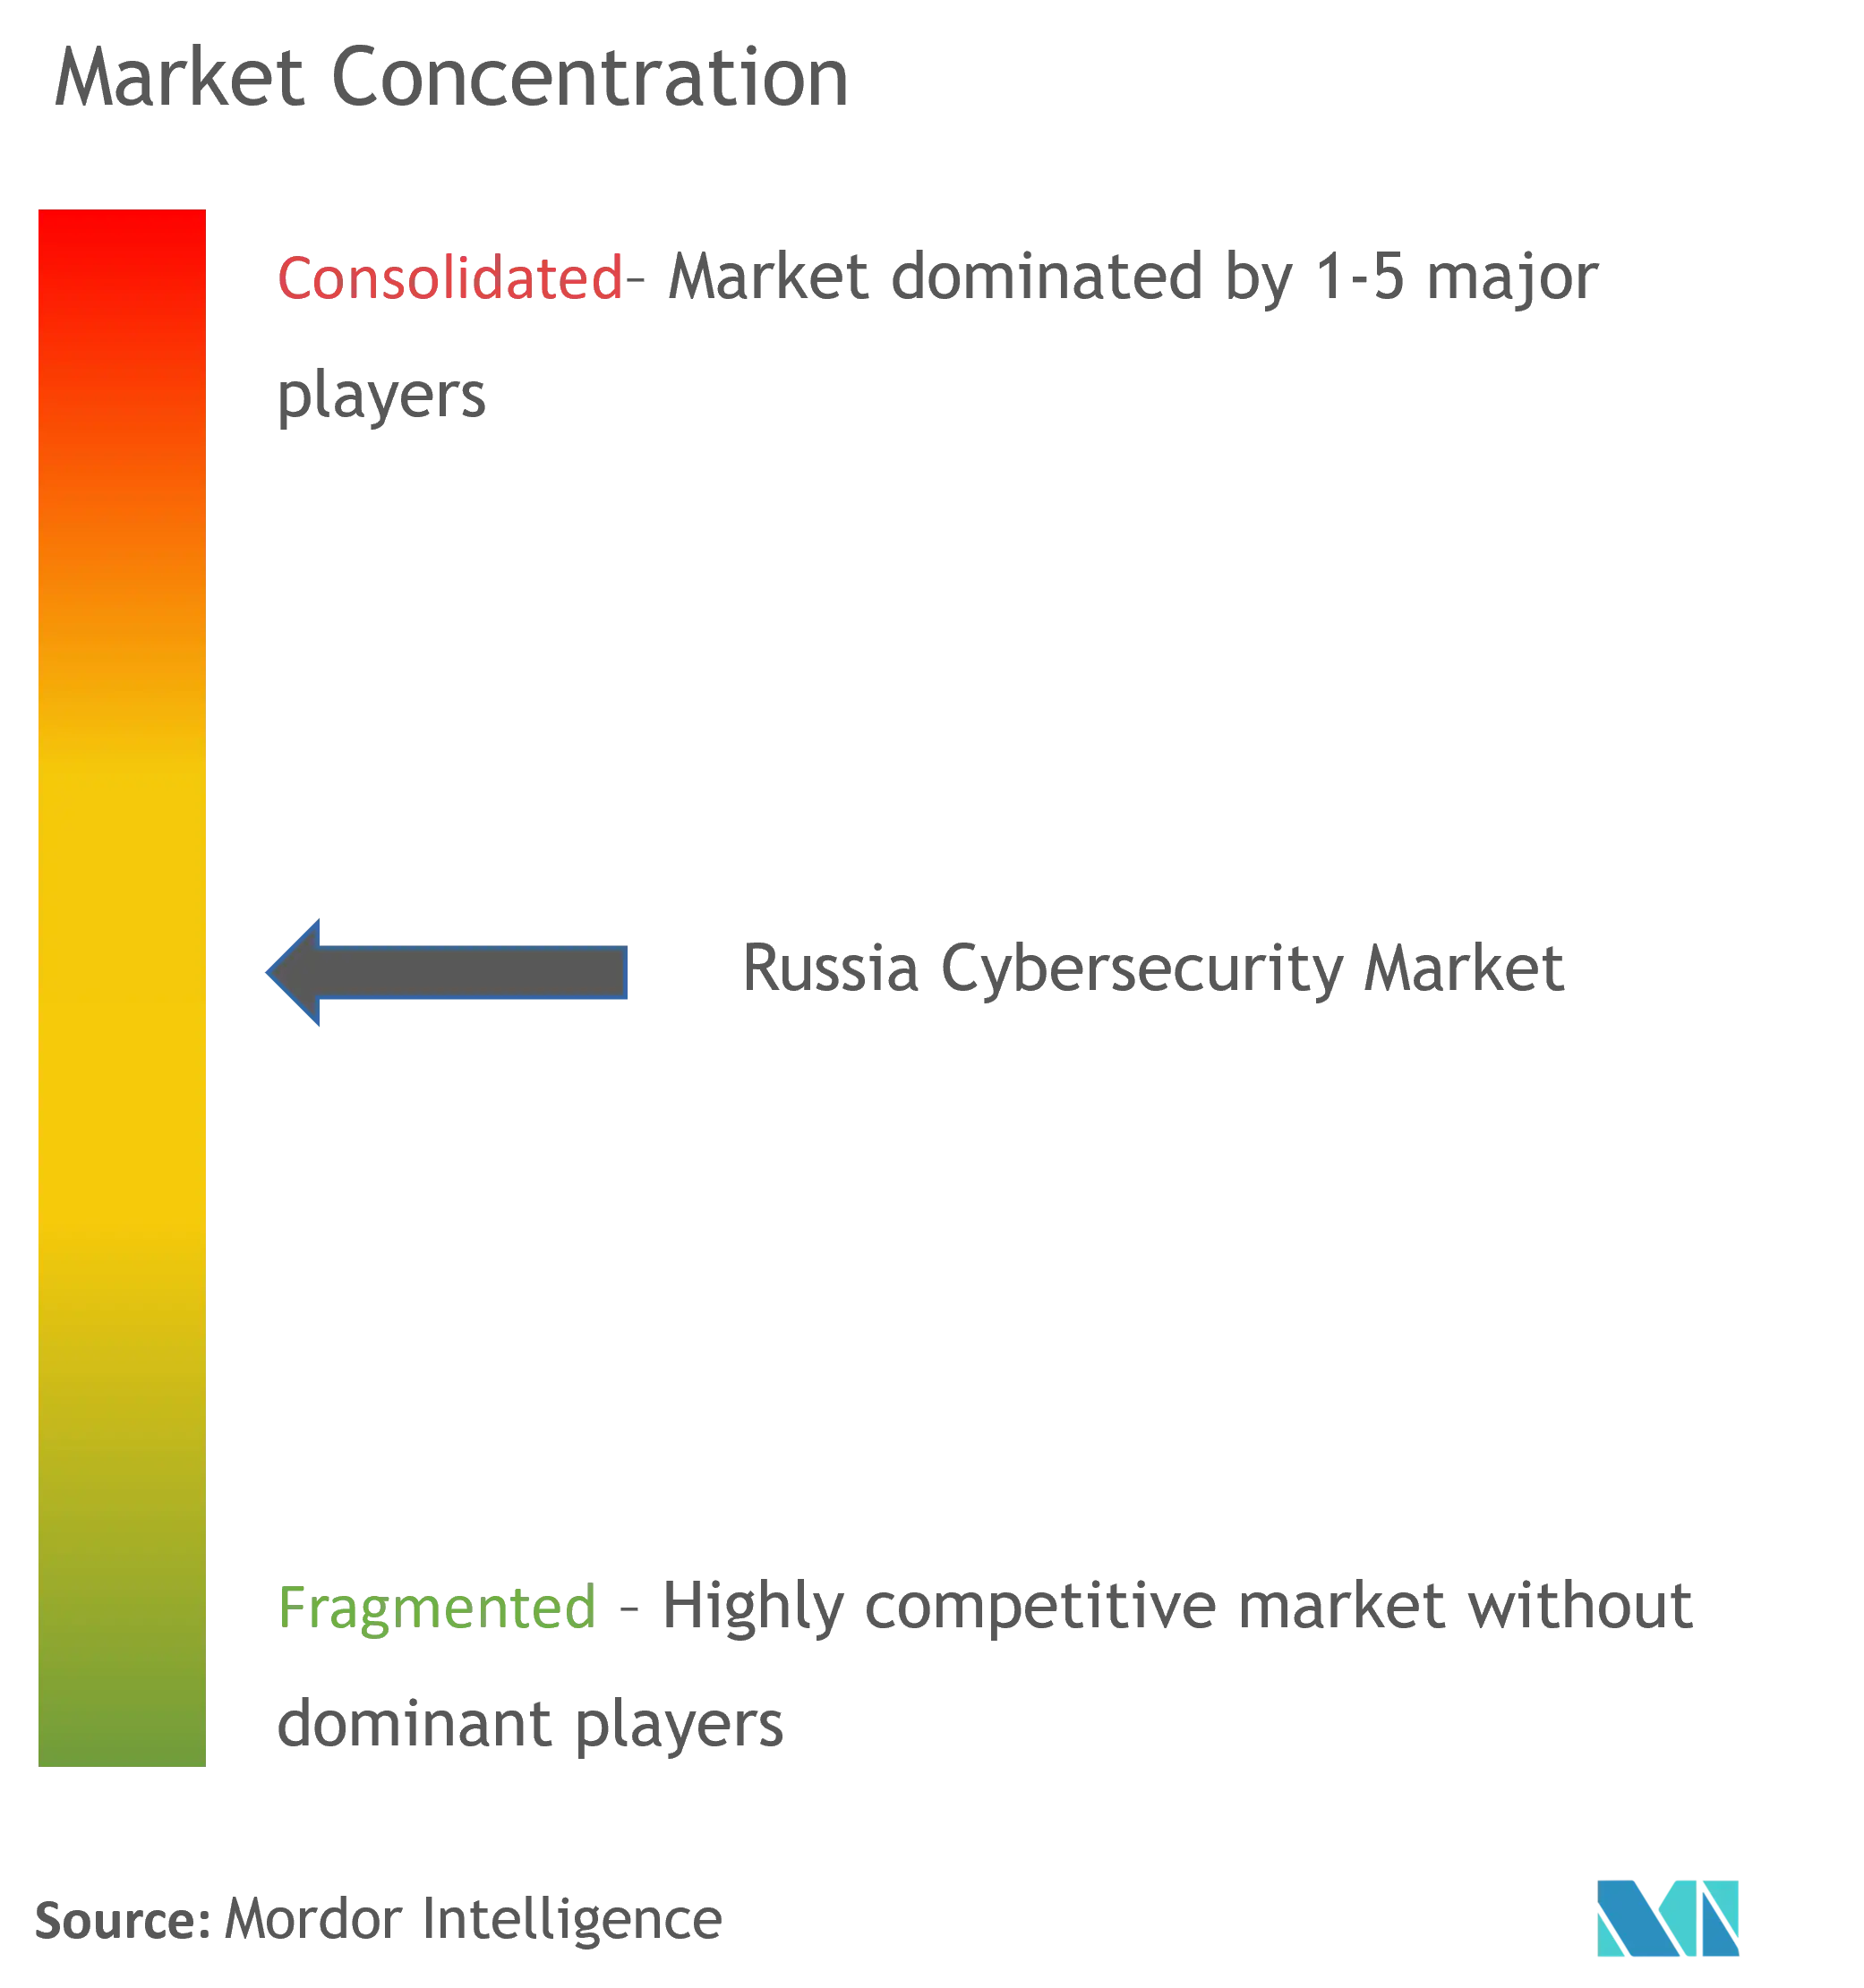 Russia Cybersecurity Market Concentration